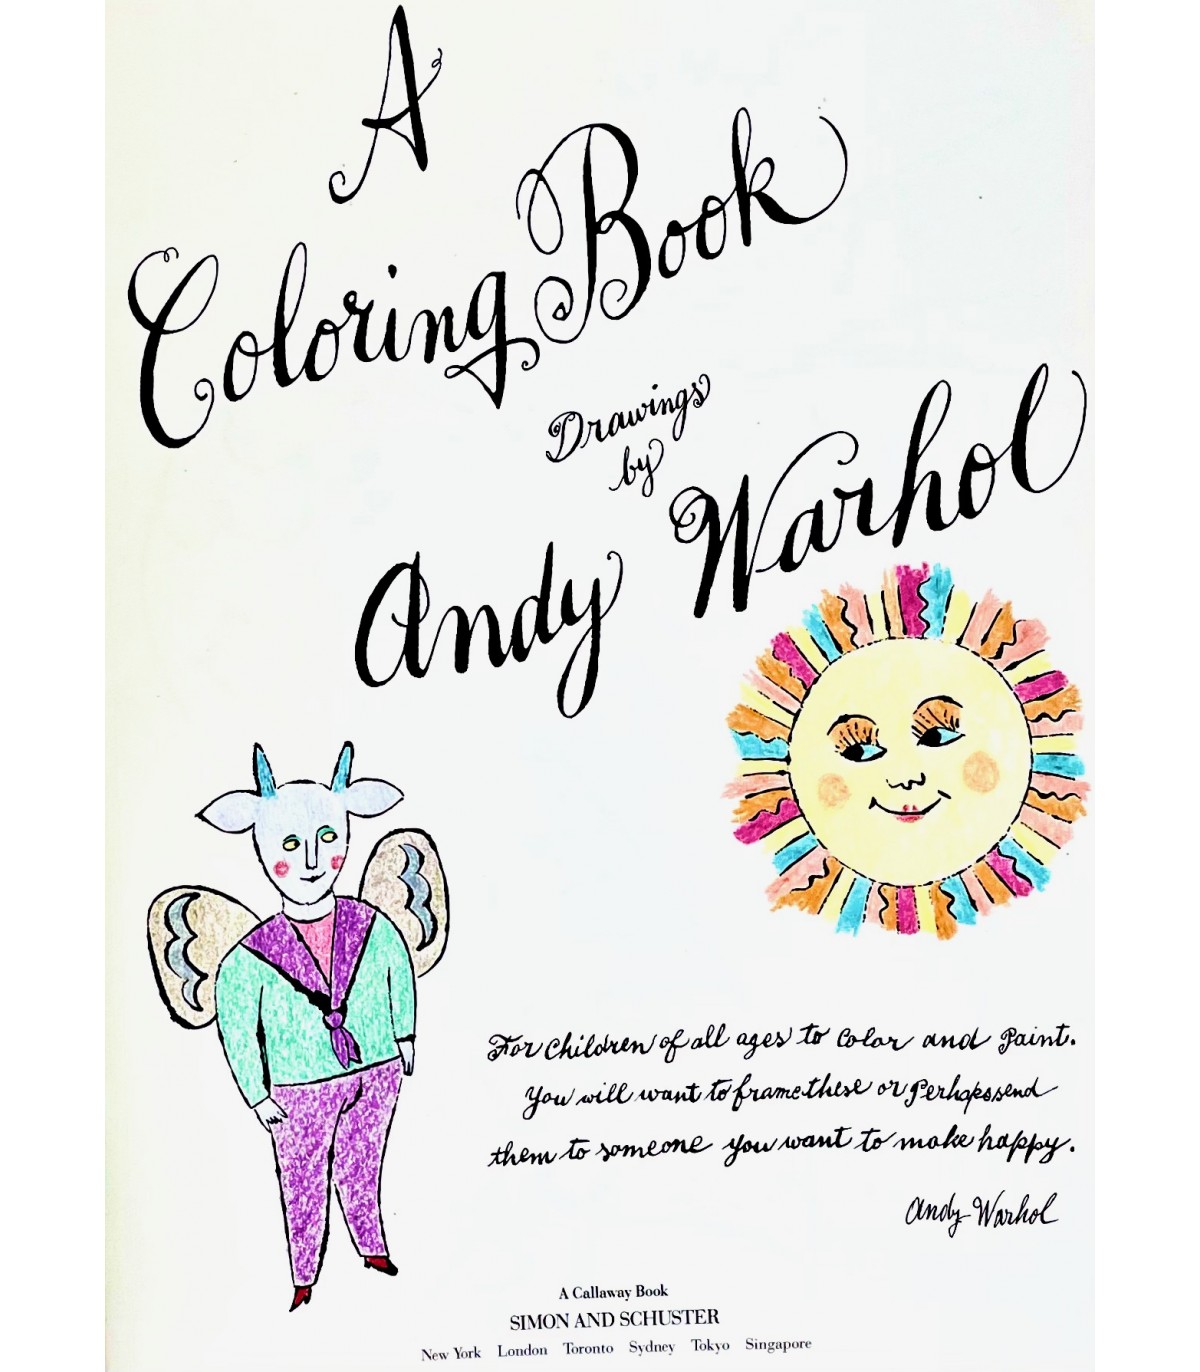 WARHOL (Andy). A coloring book. Drawings by Andy Warhol.